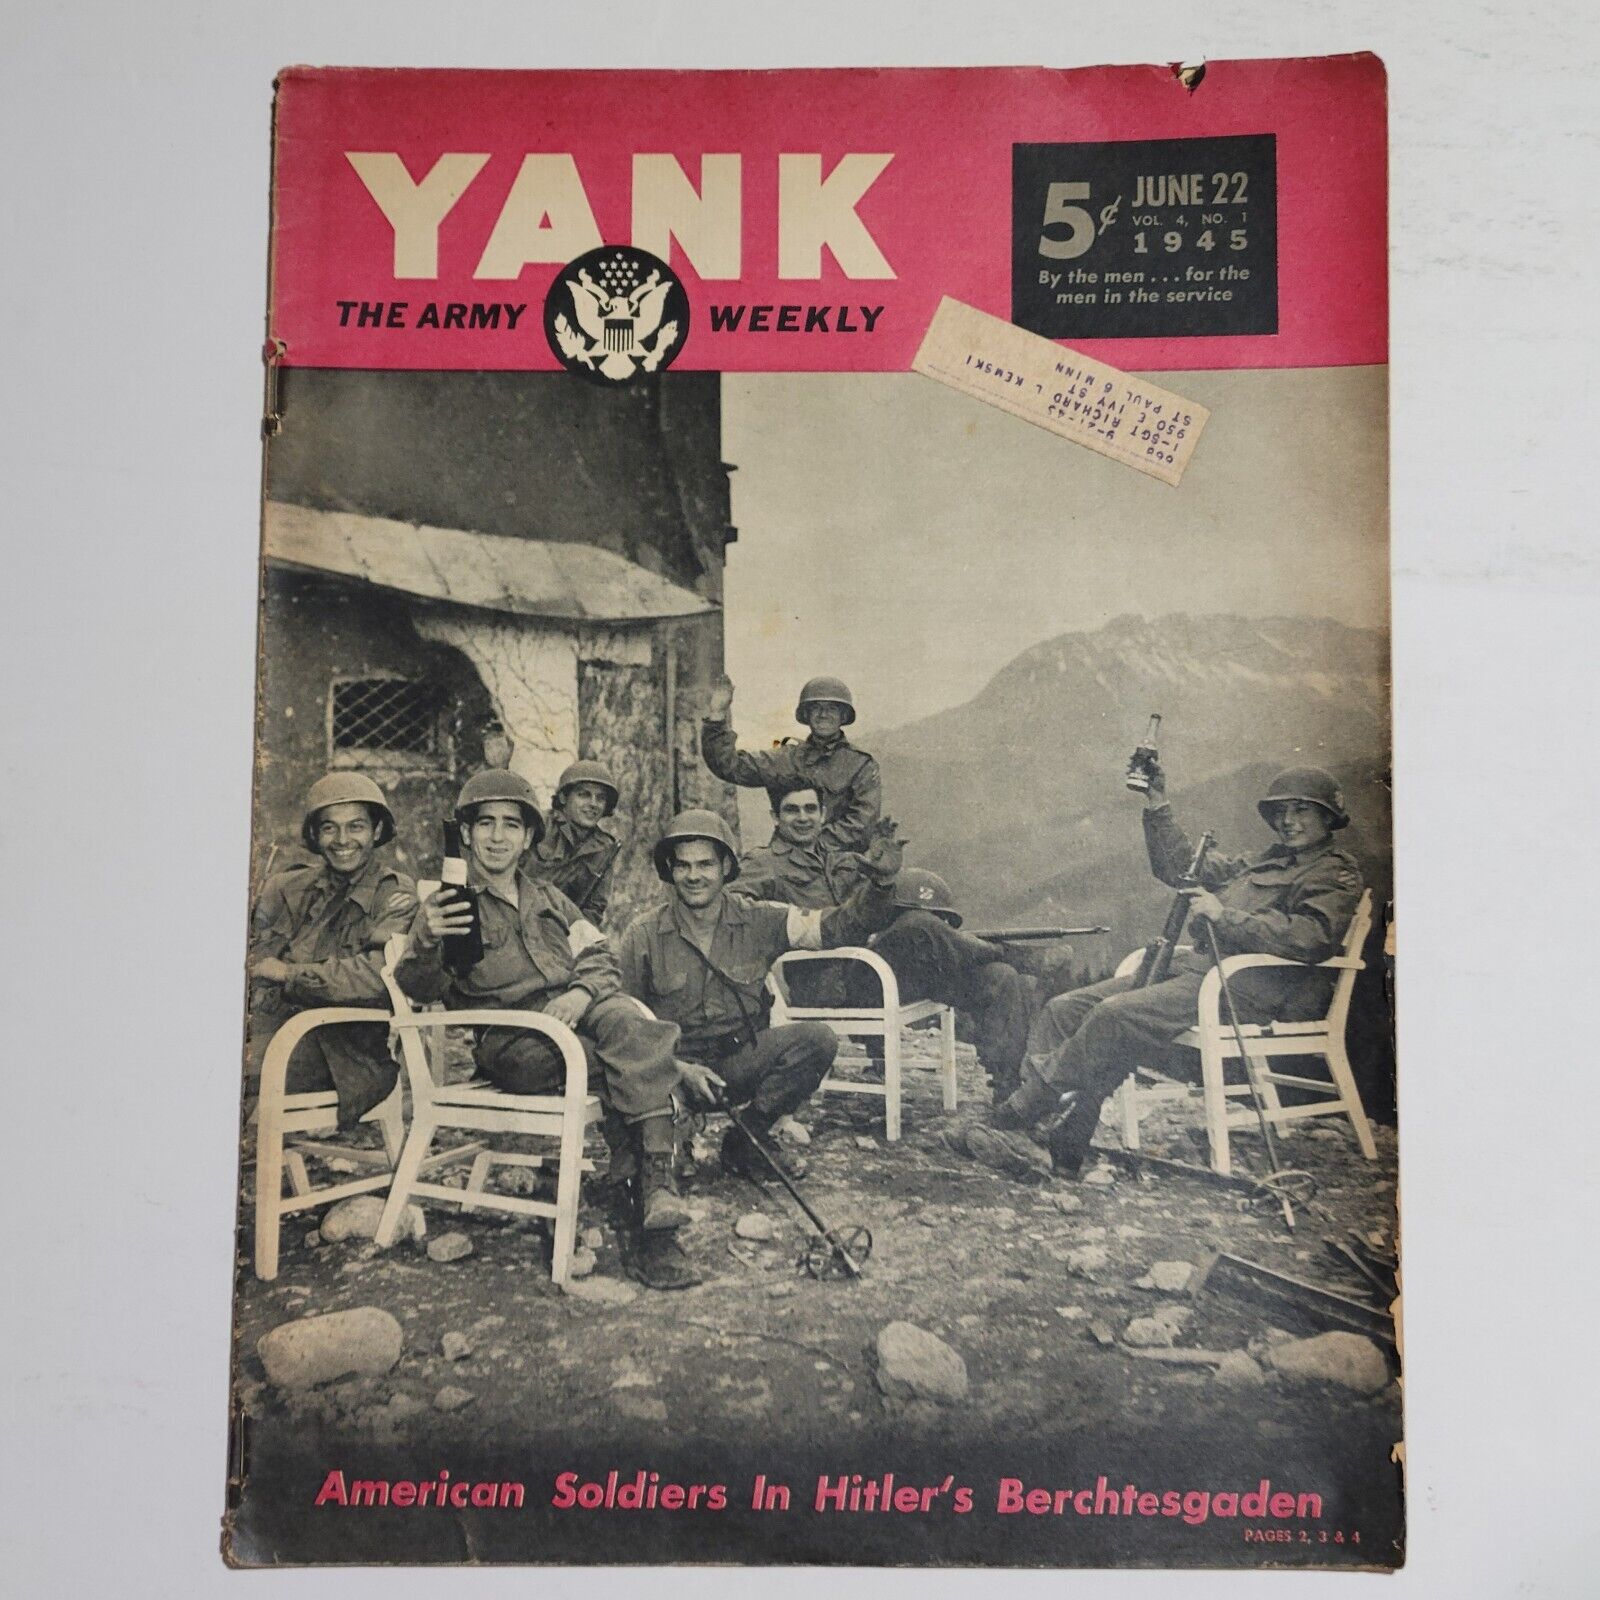 YANK THE ARMY WEEKLY MAGAZINE June 22 1945 Soldiers in Hitler's Berchtesgaden 